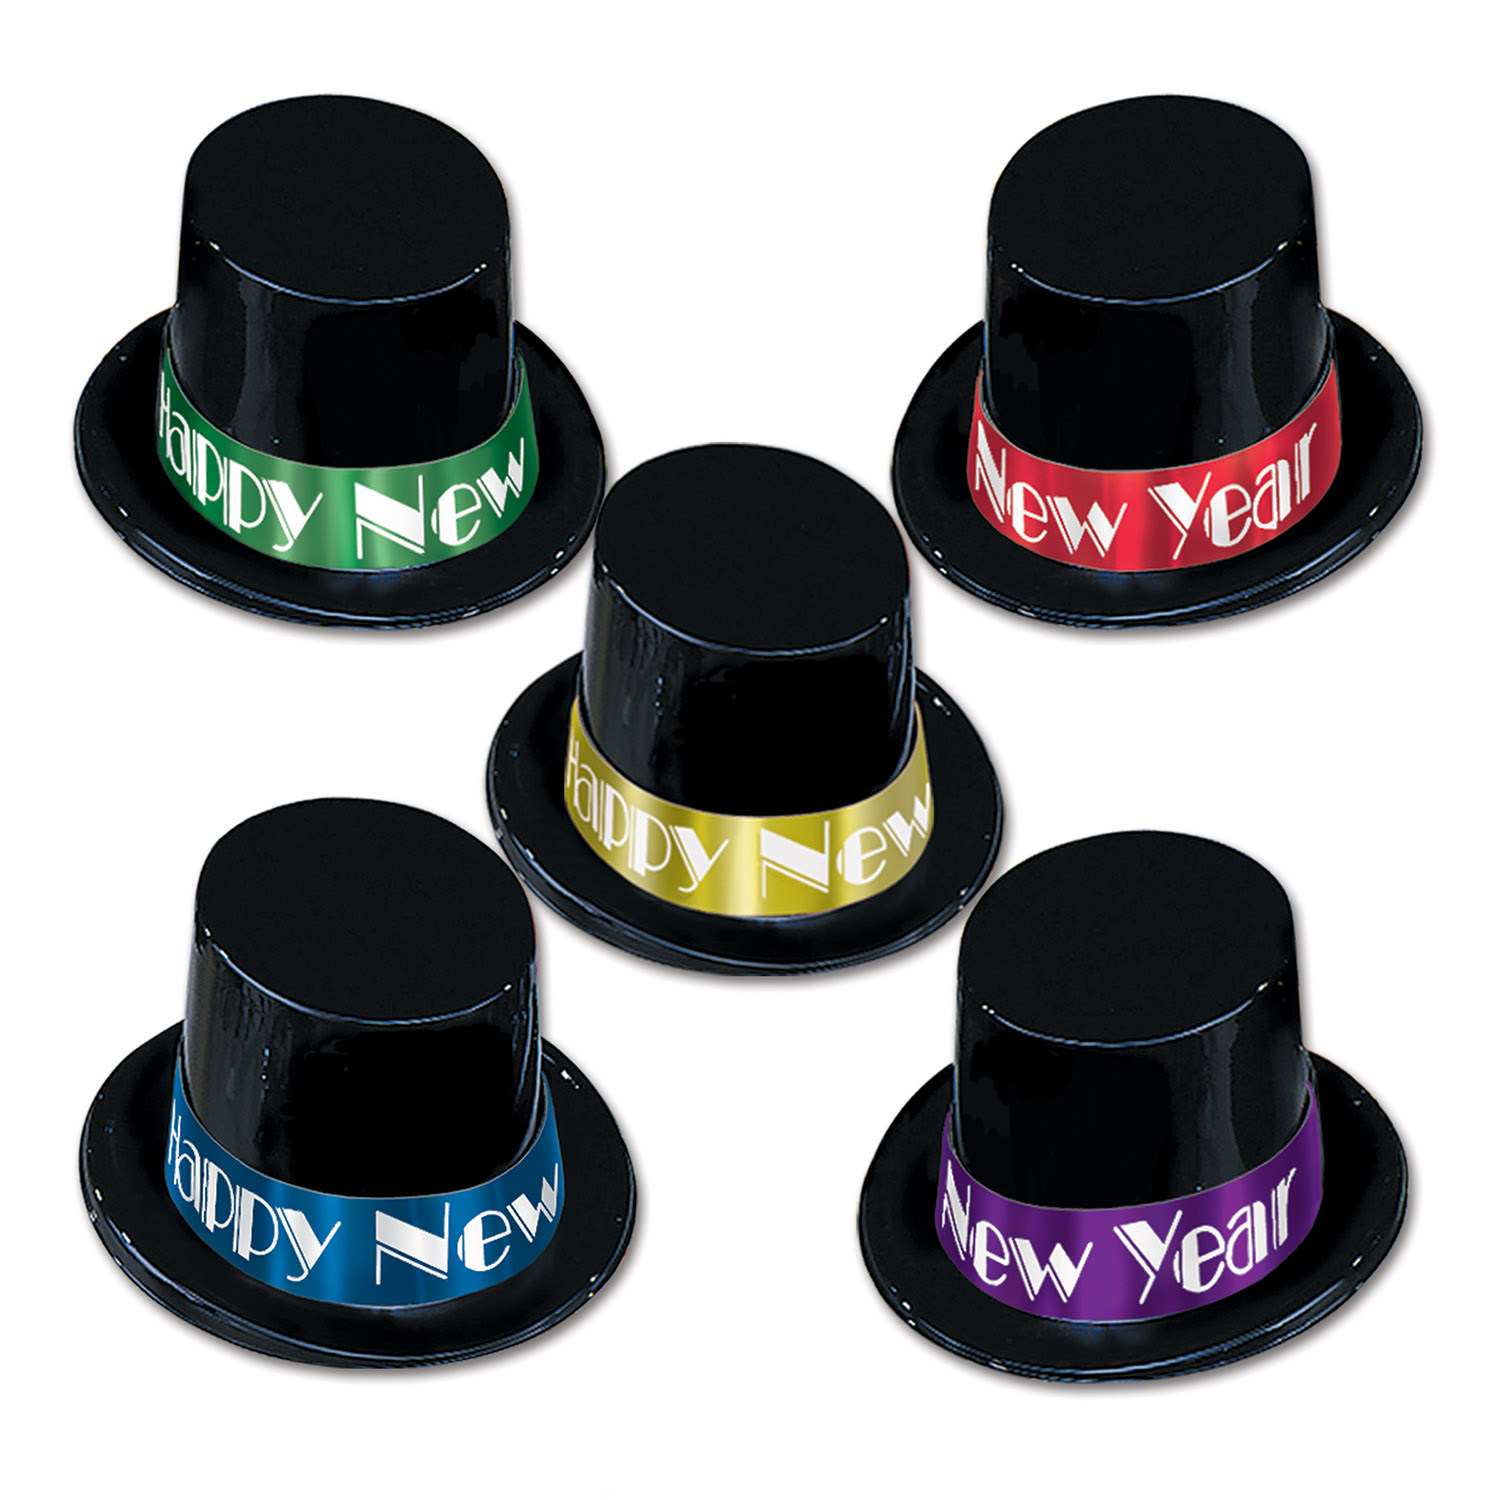 wholesale-new-year-s-eve-party-hats